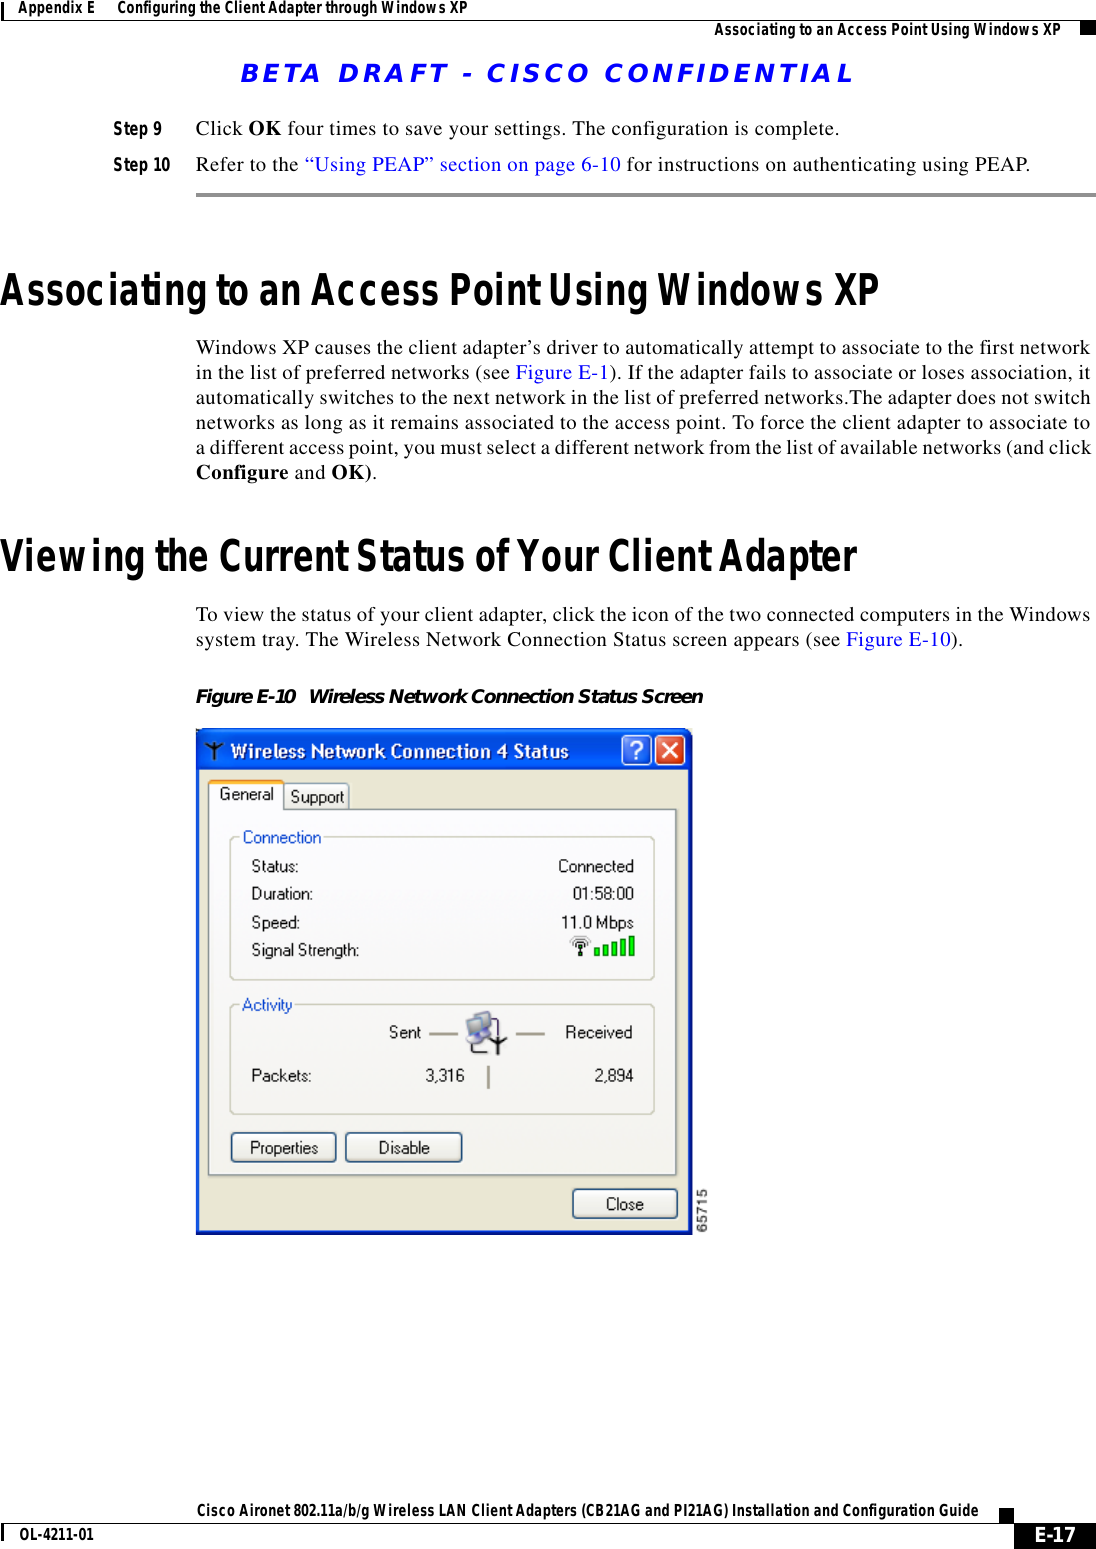 BETA DRAFT - CISCO CONFIDENTIALE-17Cisco Aironet 802.11a/b/g Wireless LAN Client Adapters (CB21AG and PI21AG) Installation and Configuration GuideOL-4211-01Appendix E      Configuring the Client Adapter through Windows XP Associating to an Access Point Using Windows XPStep 9 Click OK four times to save your settings. The configuration is complete.Step 10 Refer to the “Using PEAP” section on page 6-10 for instructions on authenticating using PEAP.Associating to an Access Point Using Windows XPWindows XP causes the client adapter’s driver to automatically attempt to associate to the first network in the list of preferred networks (see Figure E-1). If the adapter fails to associate or loses association, it automatically switches to the next network in the list of preferred networks.The adapter does not switch networks as long as it remains associated to the access point. To force the client adapter to associate to a different access point, you must select a different network from the list of available networks (and click Configure and OK).Viewing the Current Status of Your Client AdapterTo view the status of your client adapter, click the icon of the two connected computers in the Windows system tray. The Wireless Network Connection Status screen appears (see Figure E-10).Figure E-10 Wireless Network Connection Status Screen